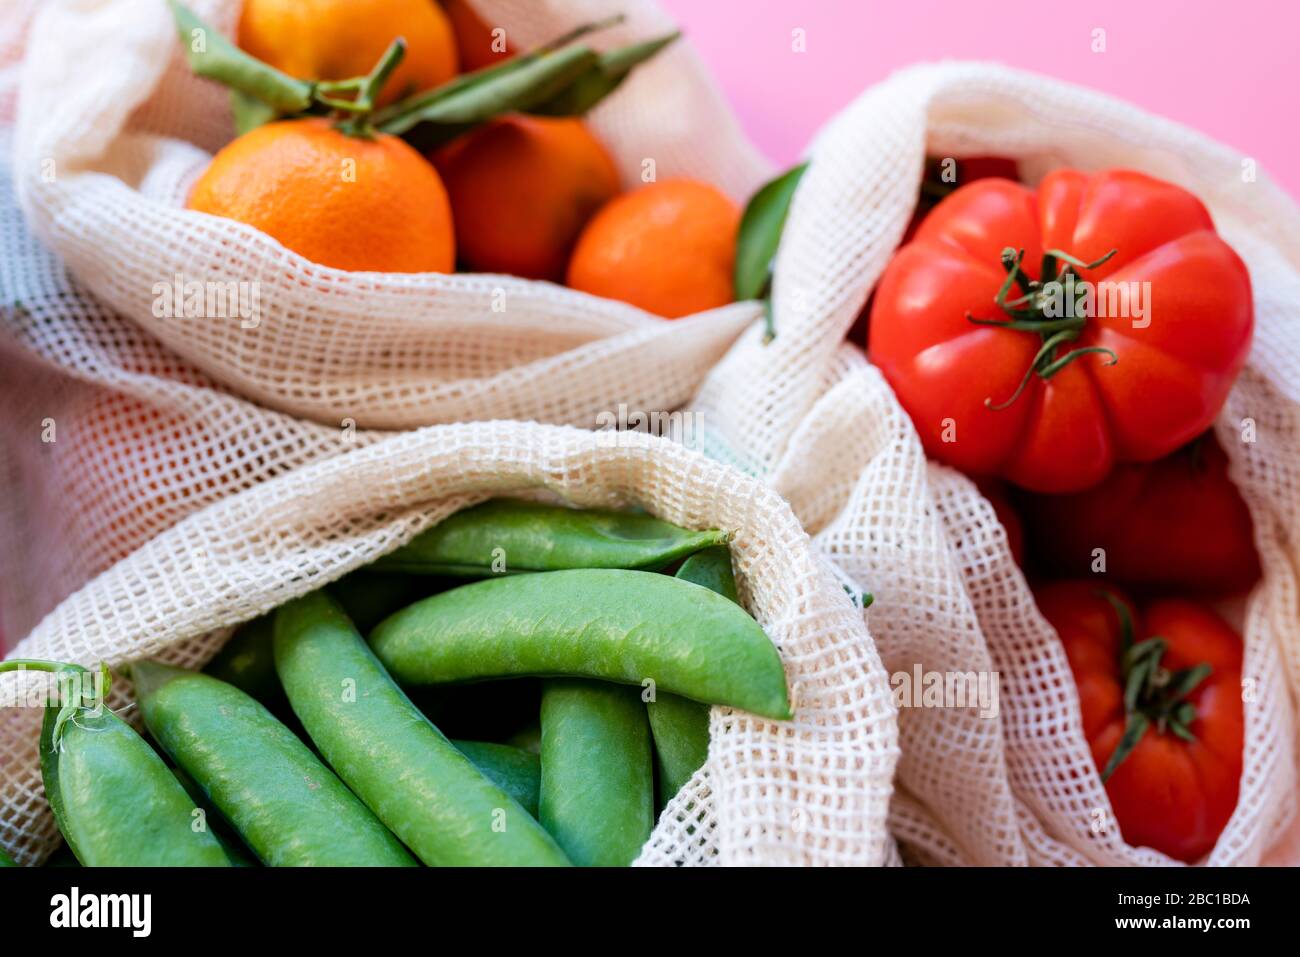 Eco-friendly reusable mesh bags with fresh green peas, tomatoes and clementines Stock Photo